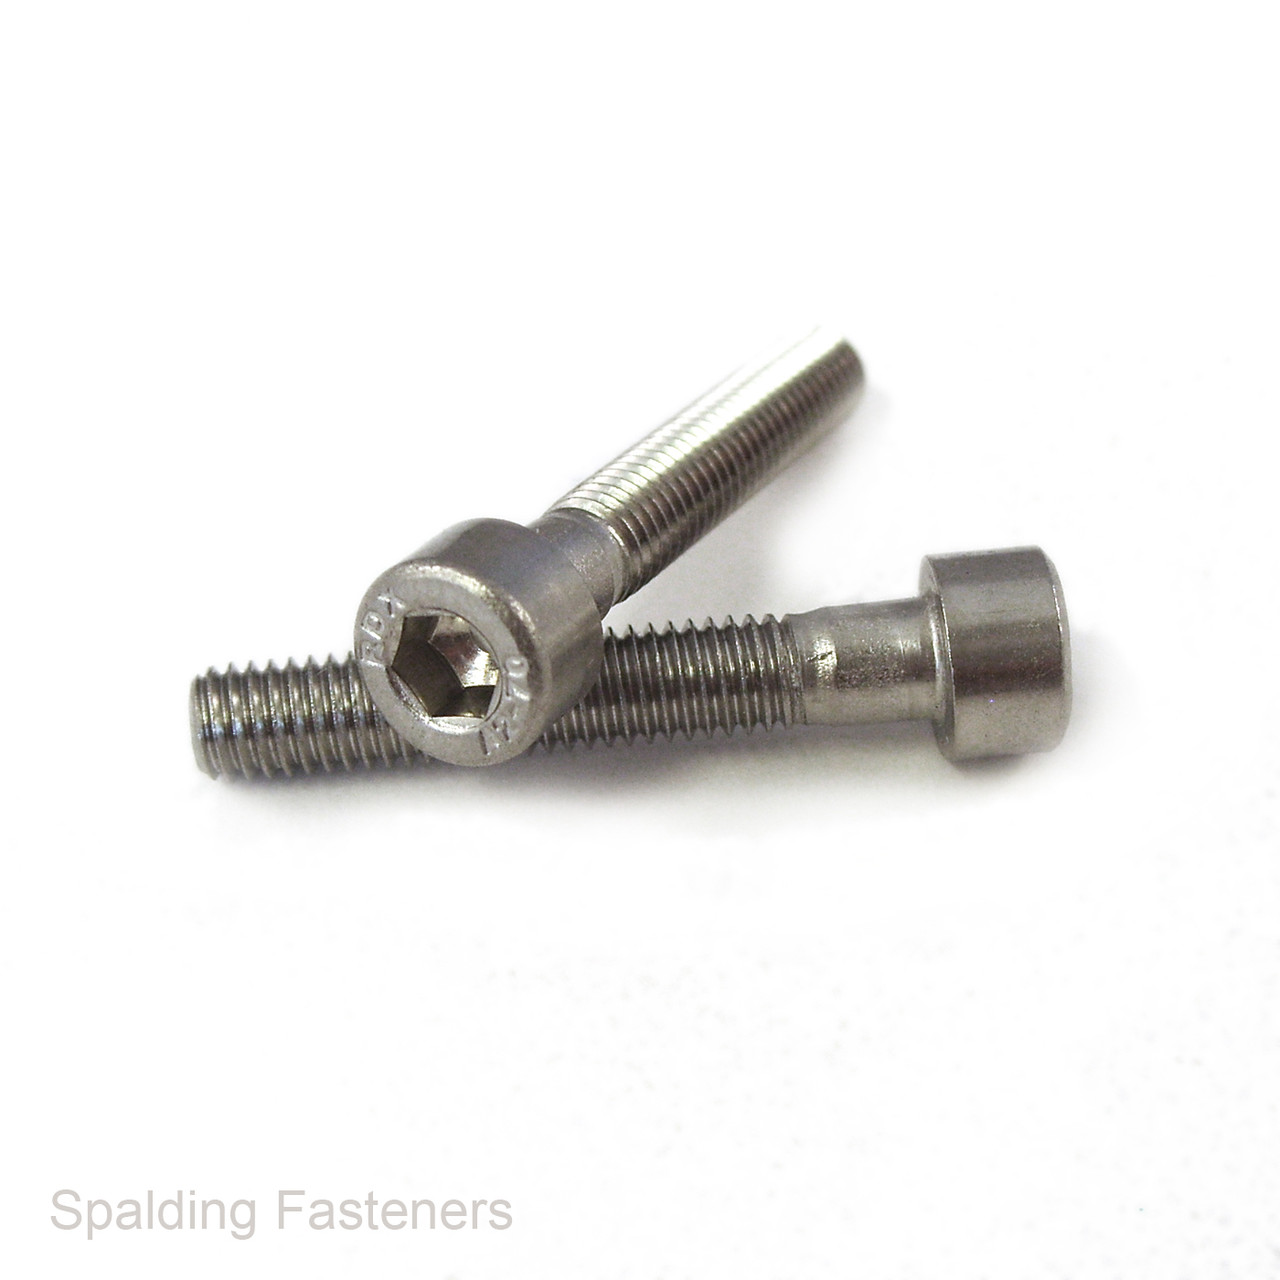 5/16" UNC A2 Grade Stainless Steel Socket Cap Bolts With Shank